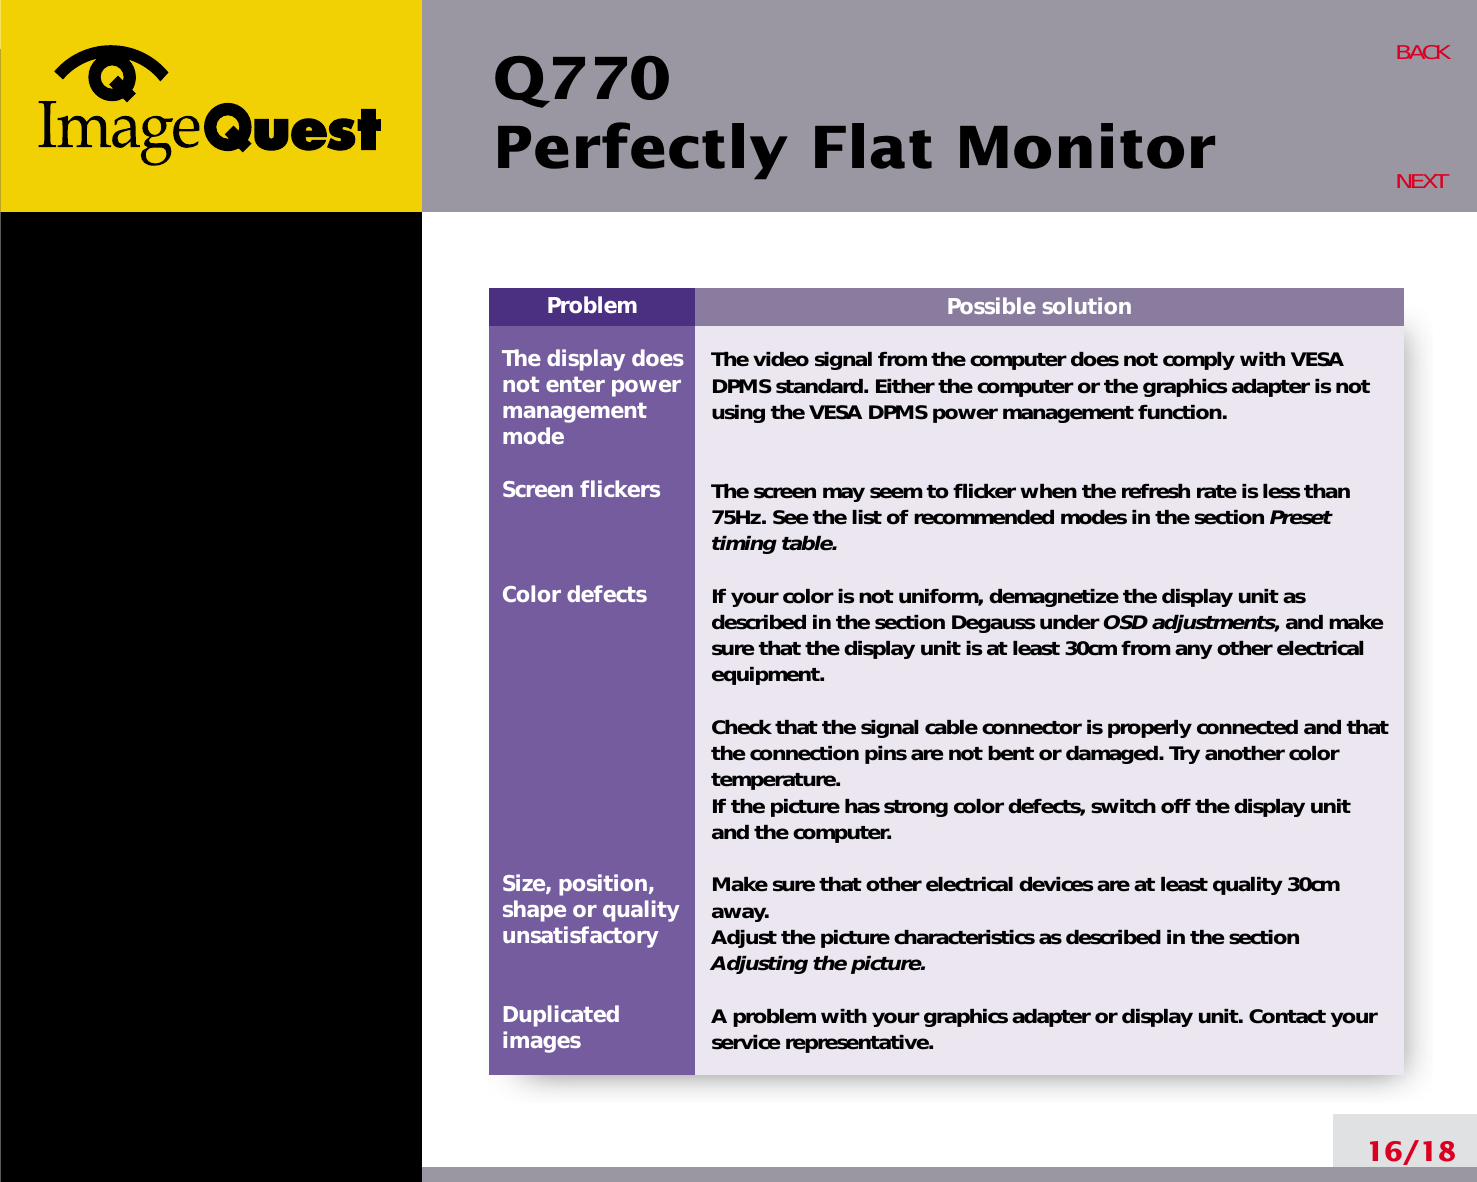 Q770Perfectly Flat Monitor16/18BACKNEXTPossible solutionThe video signal from the computer does not comply with VESADPMS standard. Either the computer or the graphics adapter is notusing the VESA DPMS power management function.The screen may seem to flicker when the refresh rate is less than75Hz. See the list of recommended modes in the section Presettiming table.If your color is not uniform, demagnetize the display unit asdescribed in the section Degauss under OSD adjustments, and makesure that the display unit is at least 30cm from any other electricalequipment.Check that the signal cable connector is properly connected and thatthe connection pins are not bent or damaged. Try another colortemperature. If the picture has strong color defects, switch off the display unitand the computer.Make sure that other electrical devices are at least quality 30cmaway.Adjust the picture characteristics as described in the sectionAdjusting the picture.A problem with your graphics adapter or display unit. Contact yourservice representative.ProblemThe display does not enter power managementmodeScreen flickersColor defectsSize, position,shape or qualityunsatisfactoryDuplicatedimages